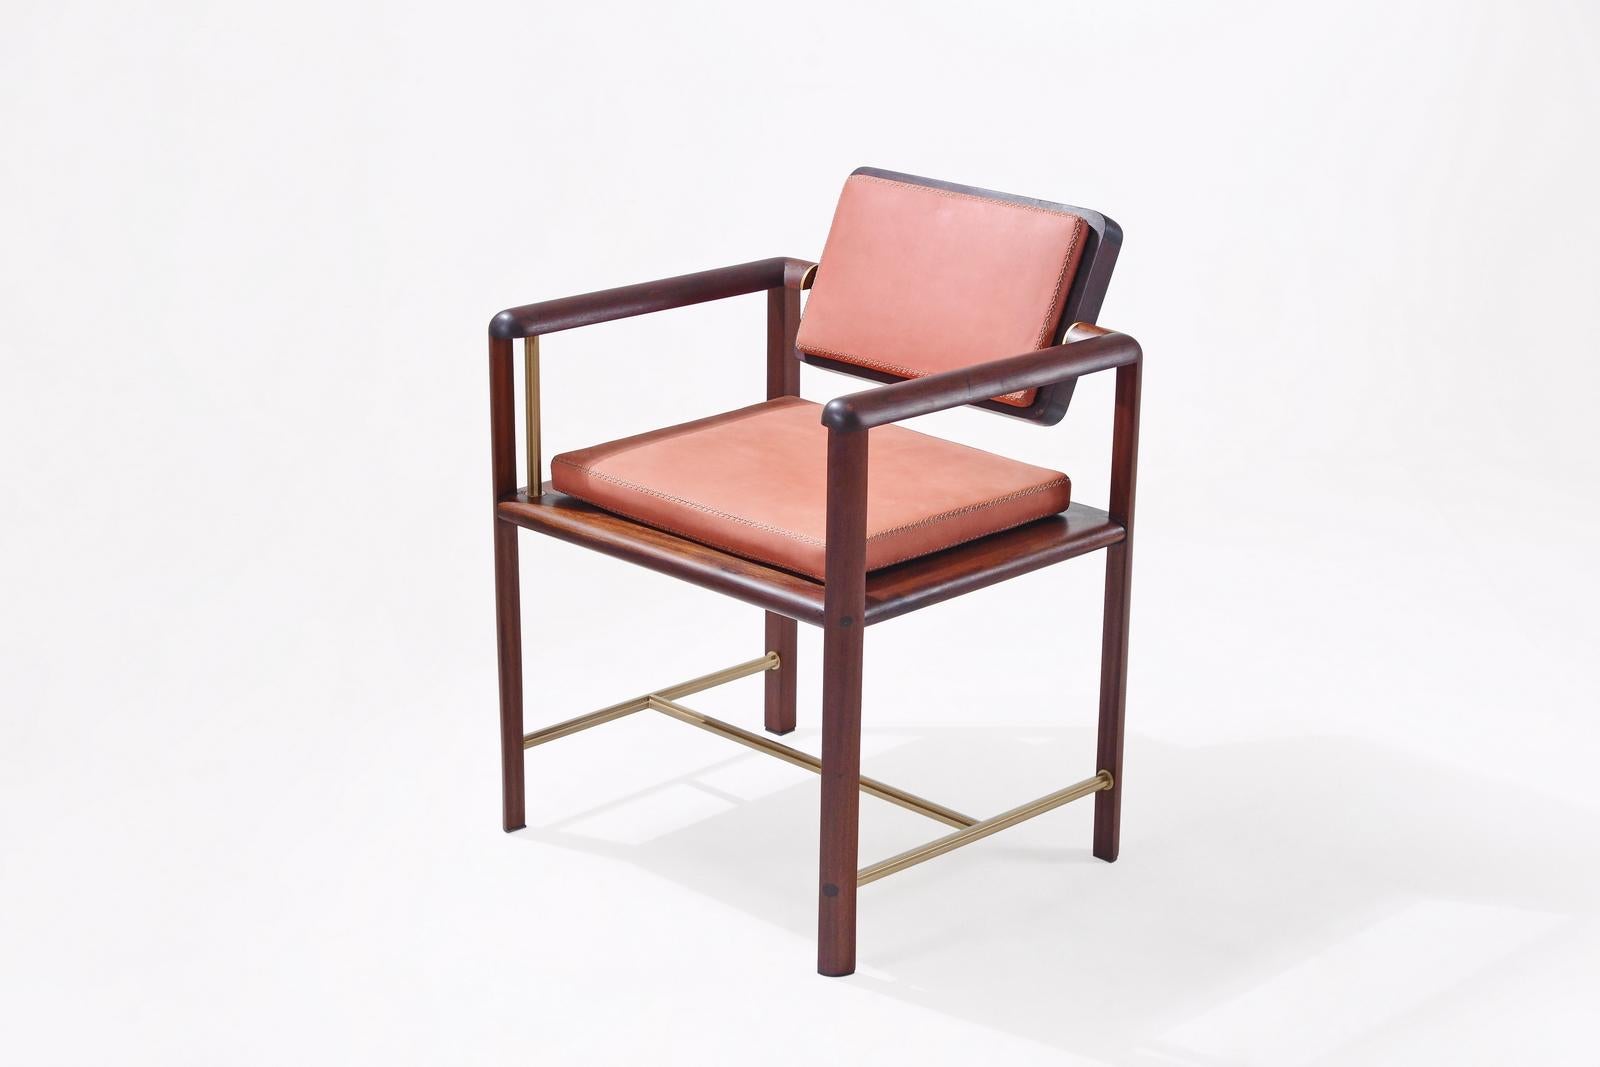 Thai Bespoke Chair Reclaimed Hardwood Handstitched Leather Seating, P. Tendercool For Sale